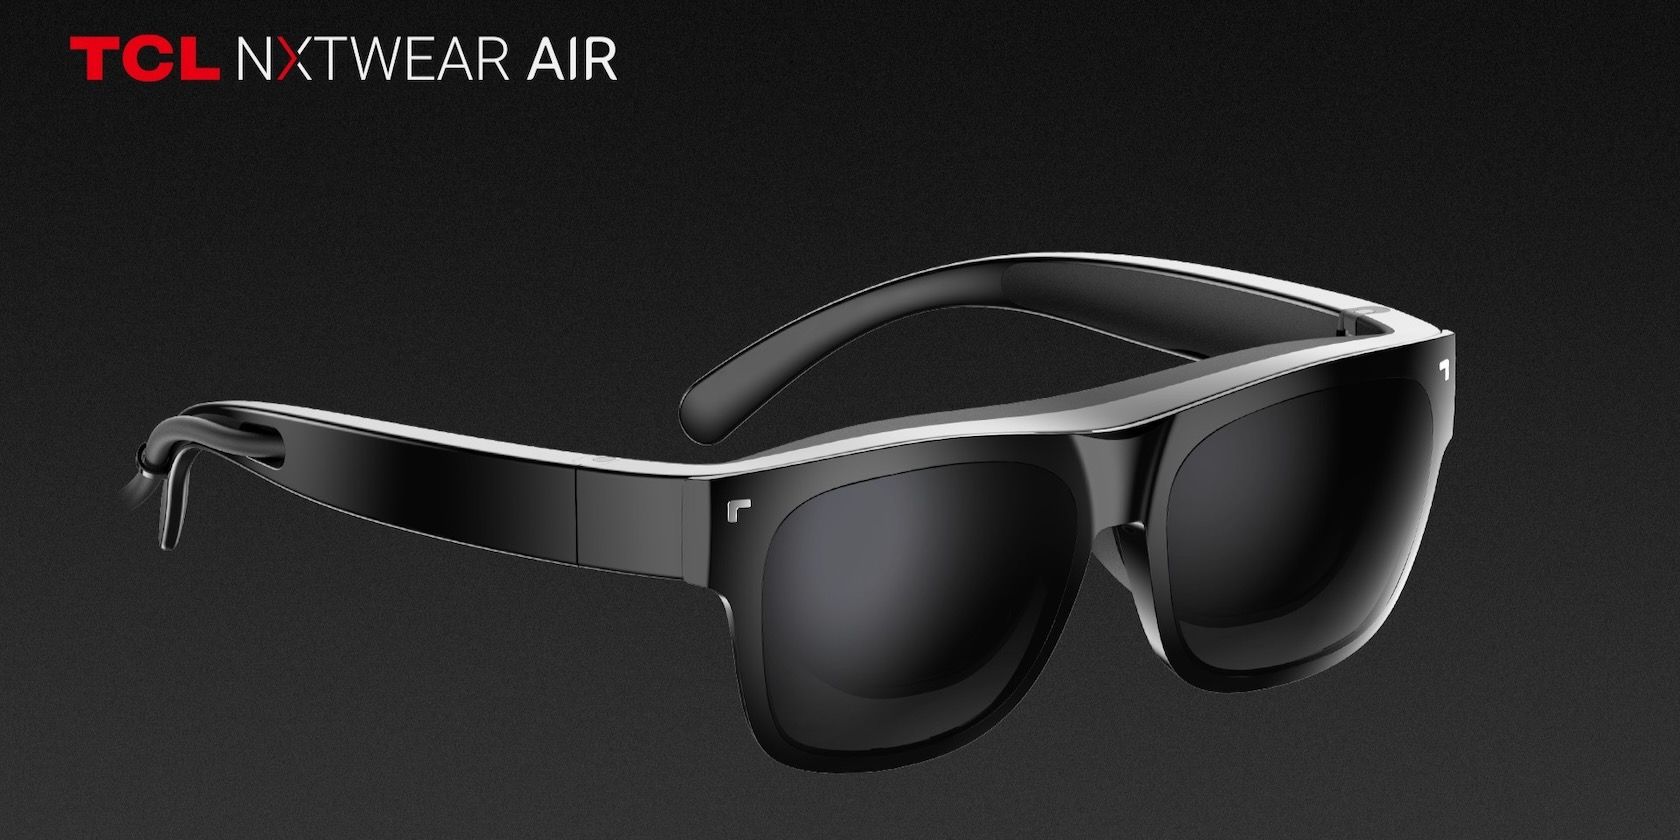 TCL's New NXTWear Air TV Glasses Are Easier on the Eye